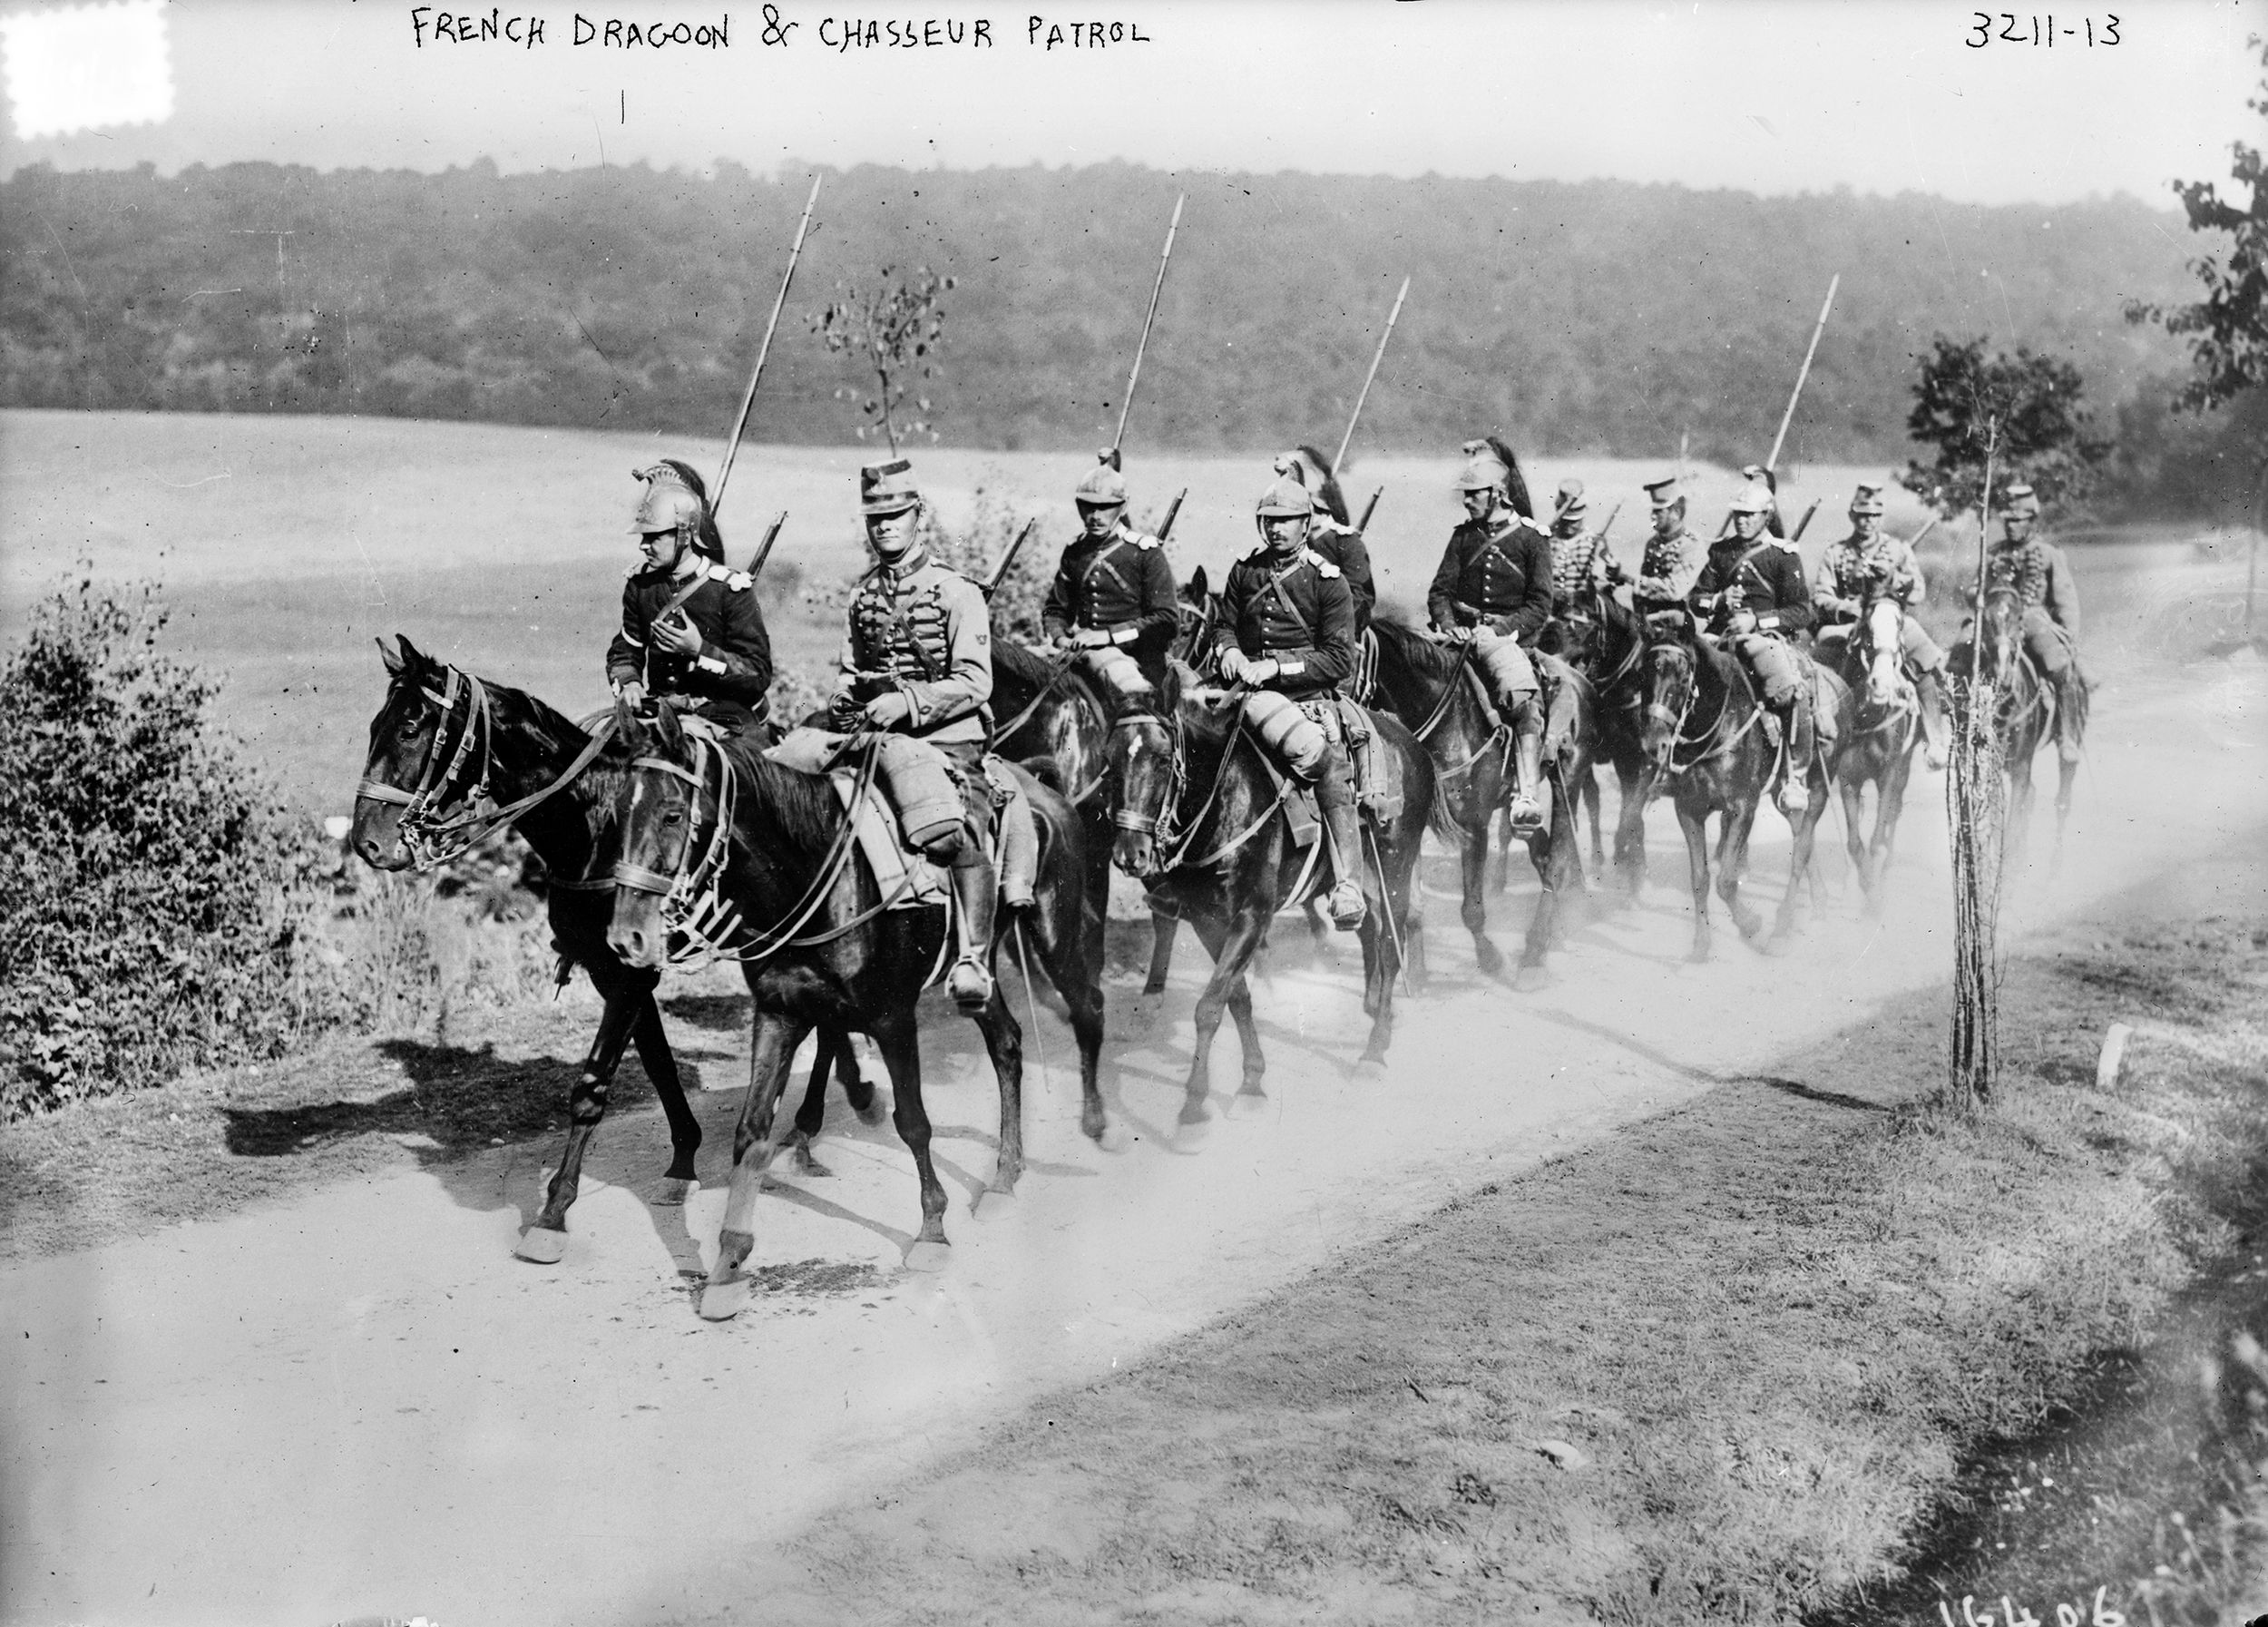 French dragoons and chasseurs in Napoleonic-style uniforms carry lances on patrol in 1914.